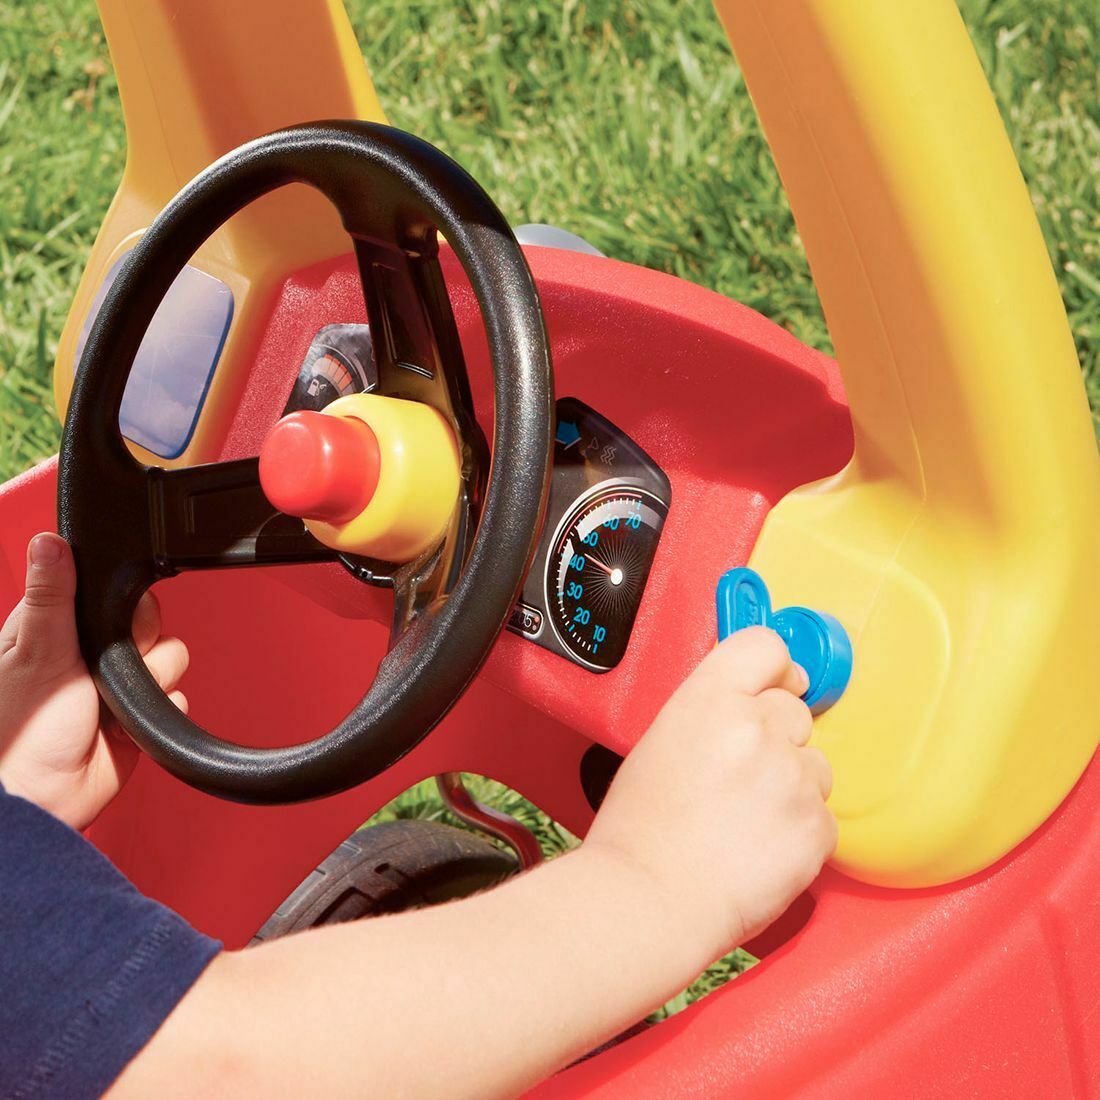 Little Tikes Cozy Coupe Ride On Toy for Toddlers and Kids! - image 3 of 5